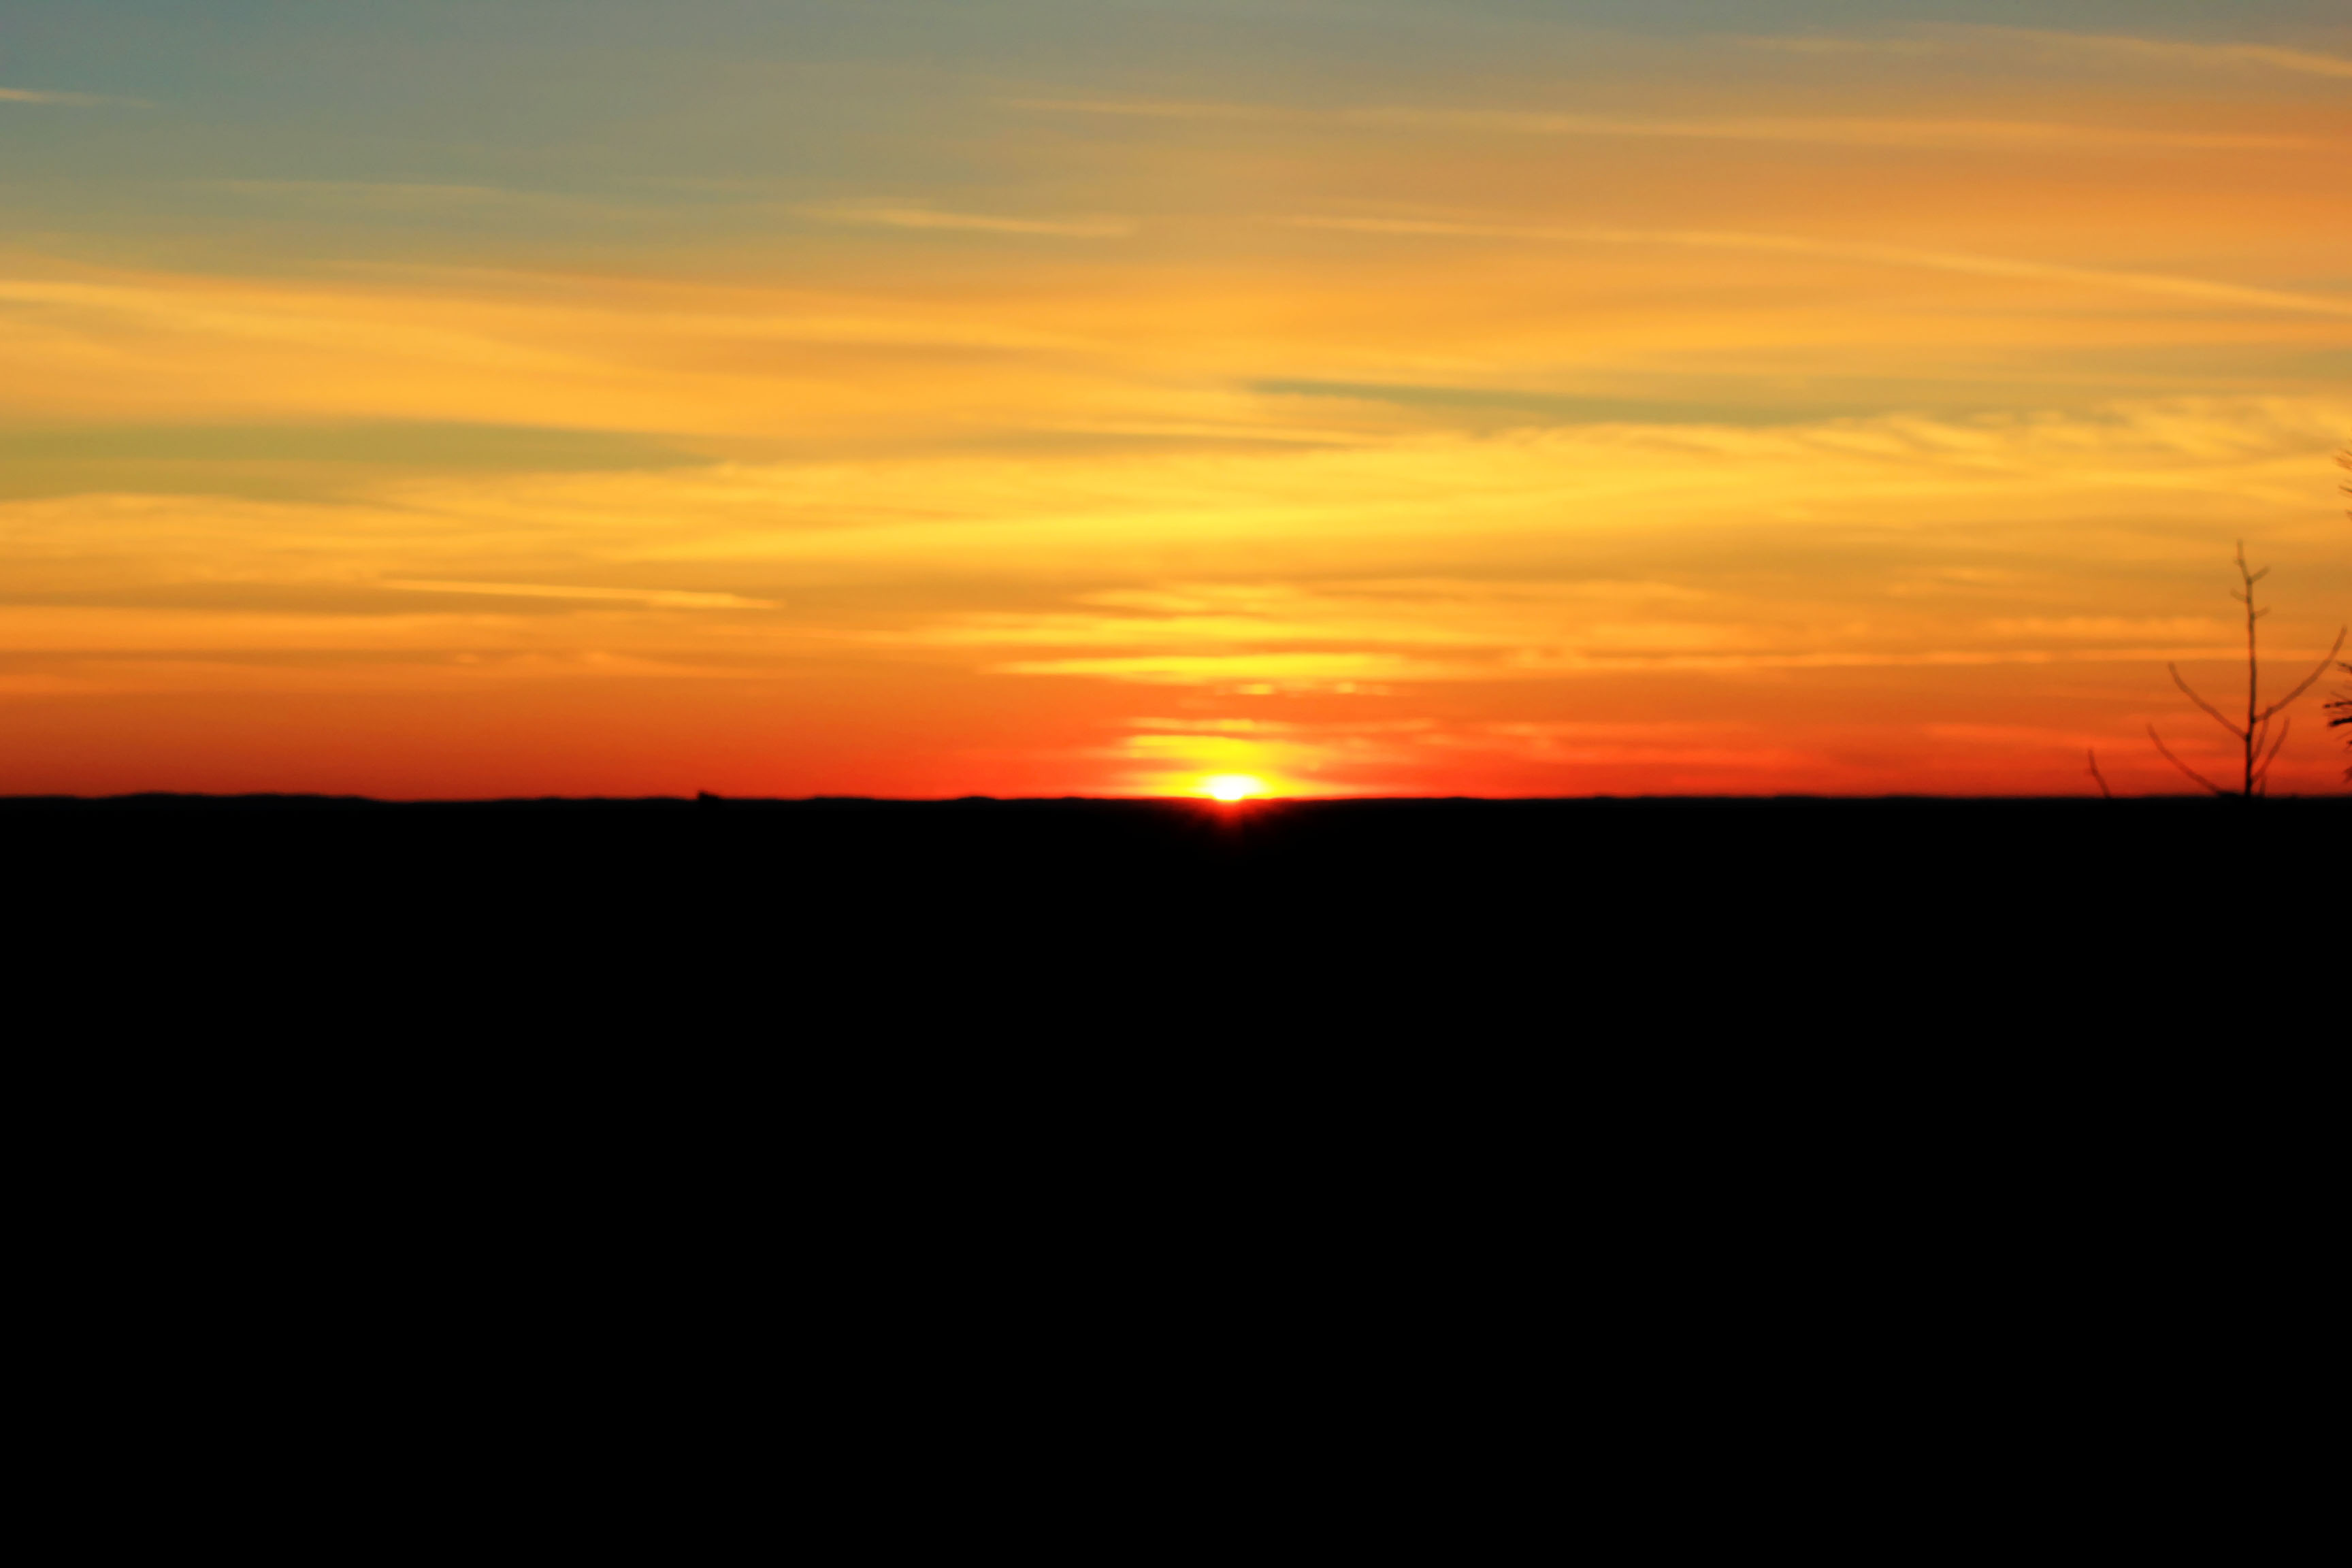 File:Gfp-wisconsin-roche-a-cri-state-park-sunset-on-the-horizon.jpg ...